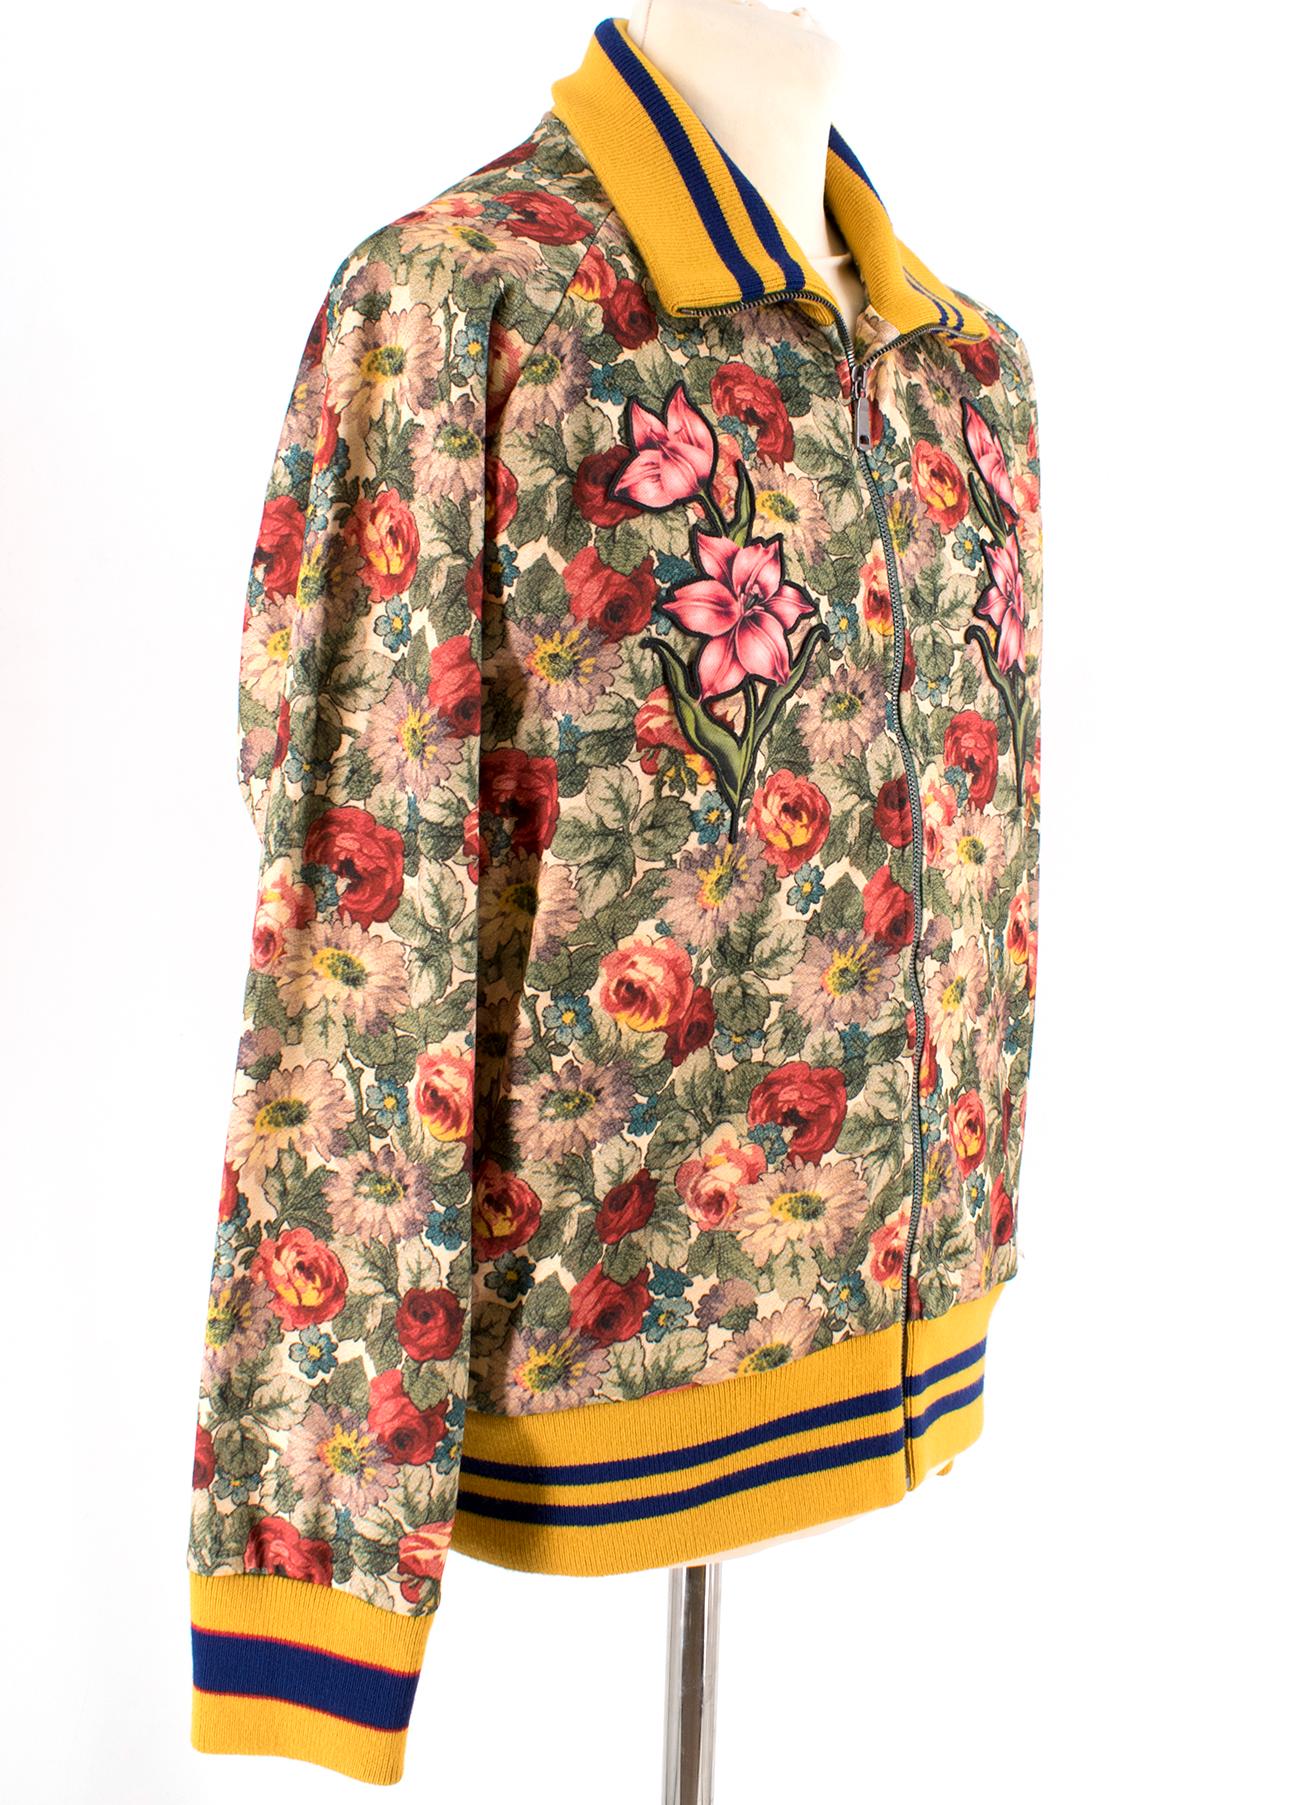 Gucci Floral Print Jacket 

Floral print jacket
Centre zip closure 
Silver hardware 
Cream interior 
Two exterior pockets with green hardware
Embroidered flowers 
Yellow with blue stripe detailing ribbed neck line, hem and cuffs 
High neck
Oversize